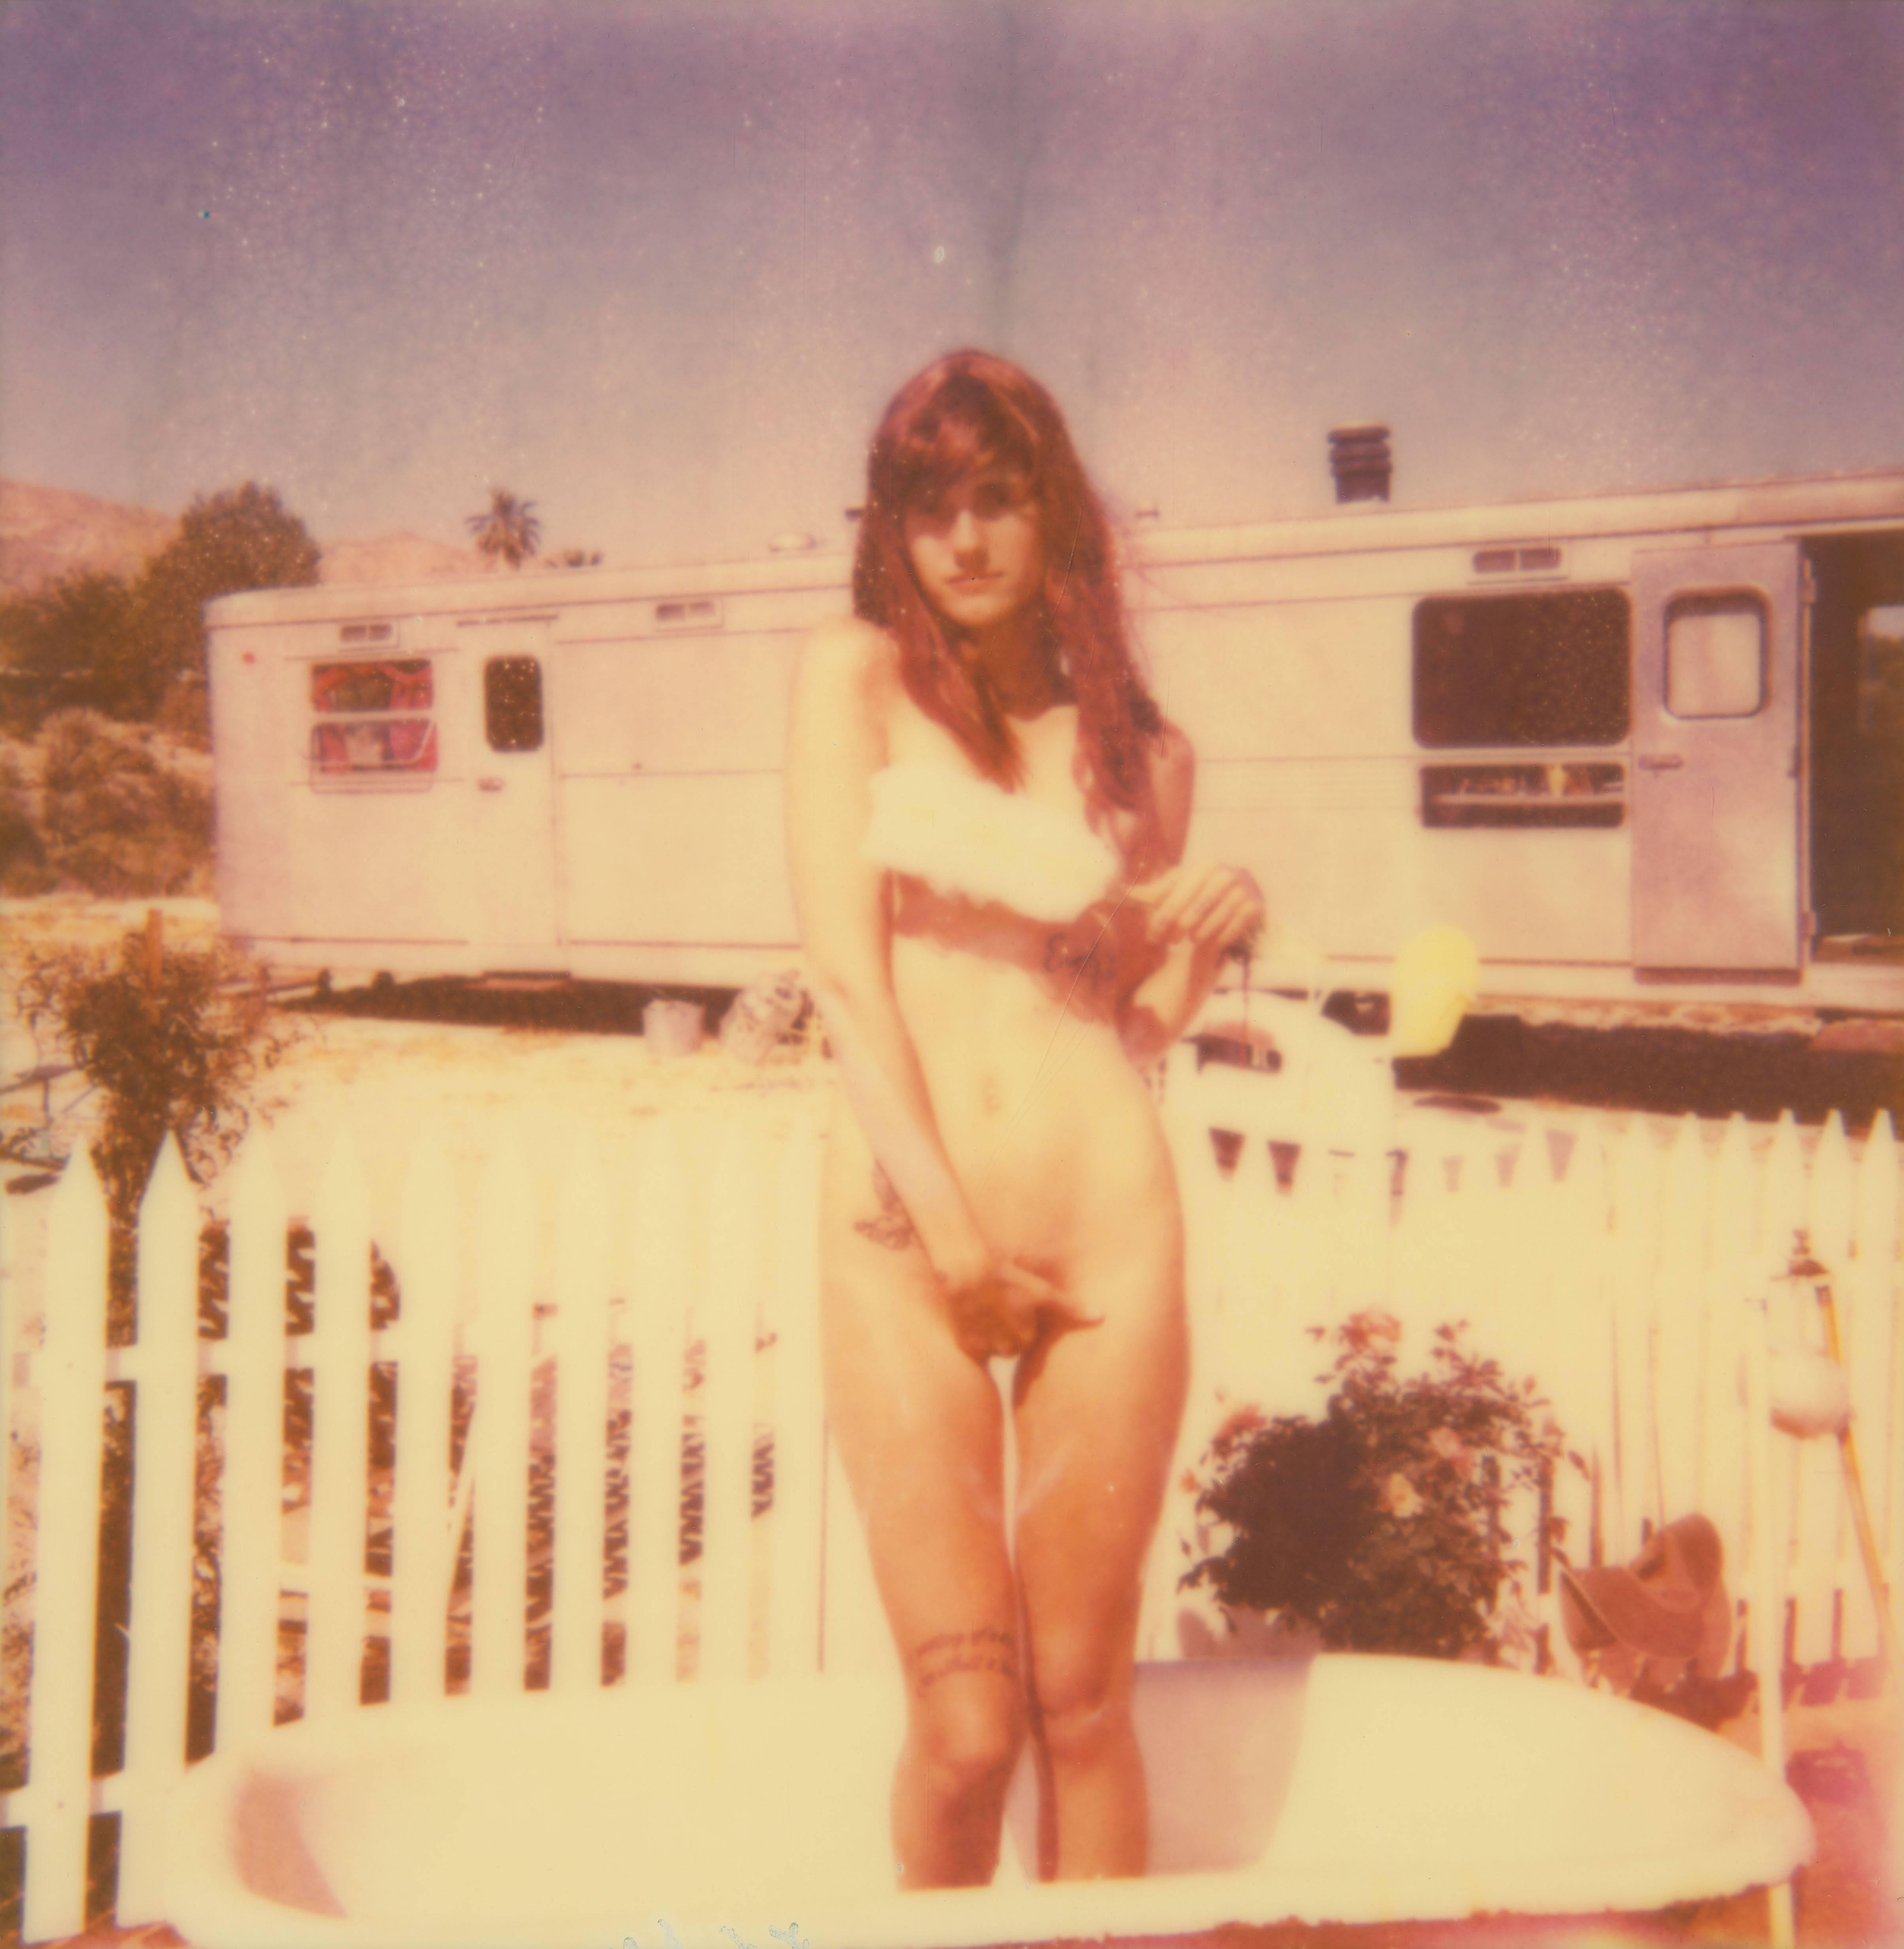 Stefanie Schneider Nude Photograph - The Girl II (The Girl behind the White Picket Fence)